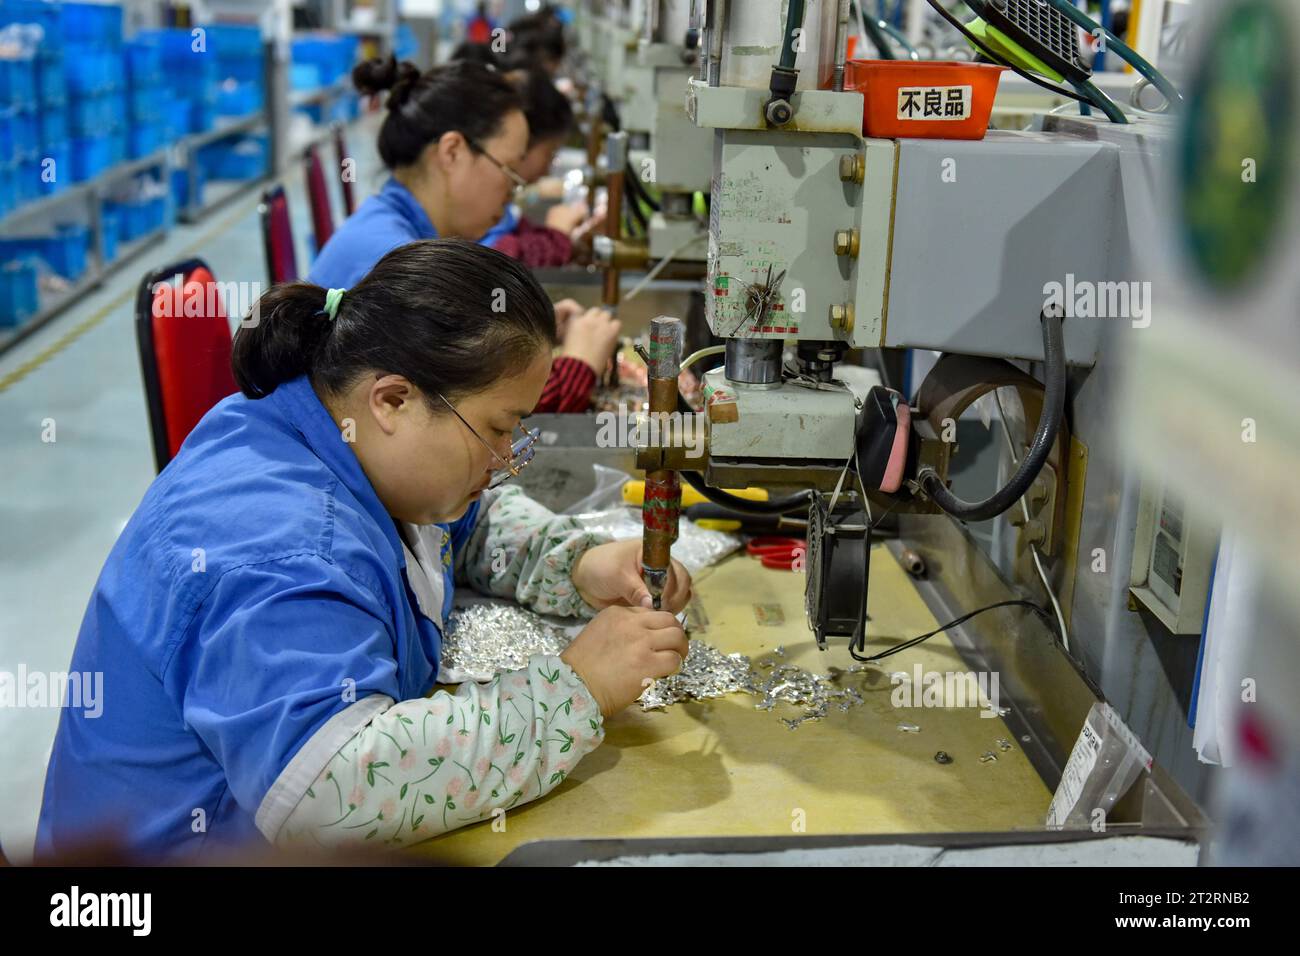 Women wearing blue overalls work on the assembly line of a factory that produces electrical equipment. China's gross domestic product grew by 4.9 percent year-on-year in the third quarter after a 6.3 percent rise in the second quarter, posting a steady recovery despite downward pressures, the National Bureau of Statistics said on Wednesday. In the first three quarters, China's GDP grew by 5.2 percent to 91.3 trillion yuan ($12.5 trillion) after a 5.5 percent growth in the first half of the year, the bureau said. (Photo by Sheldon Cooper/SOPA Images/Sipa USA) Stock Photo